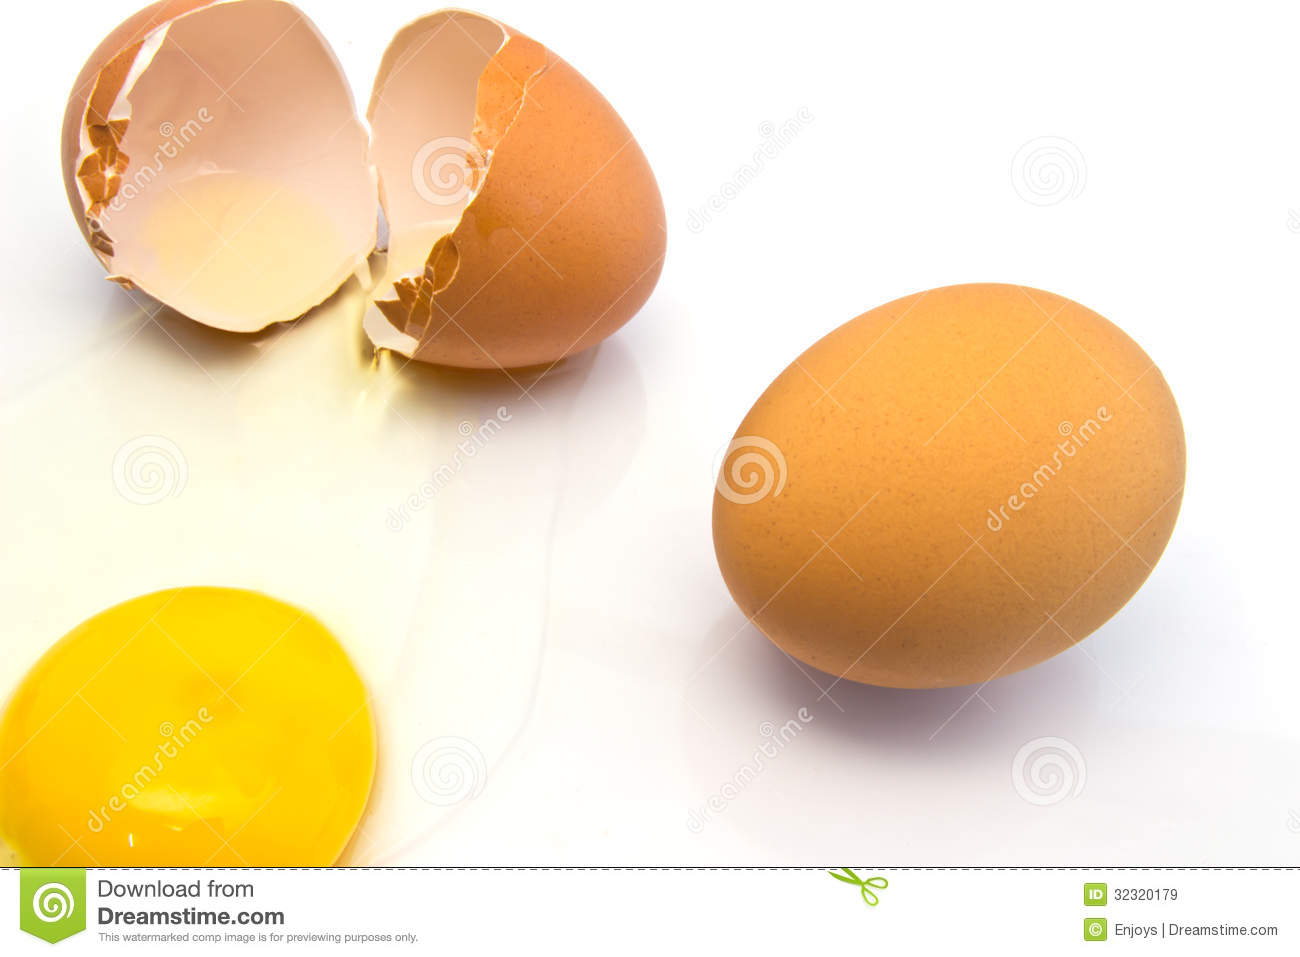 Yellow Yolk And Transparent Albumin Or Egg White Running Over A White